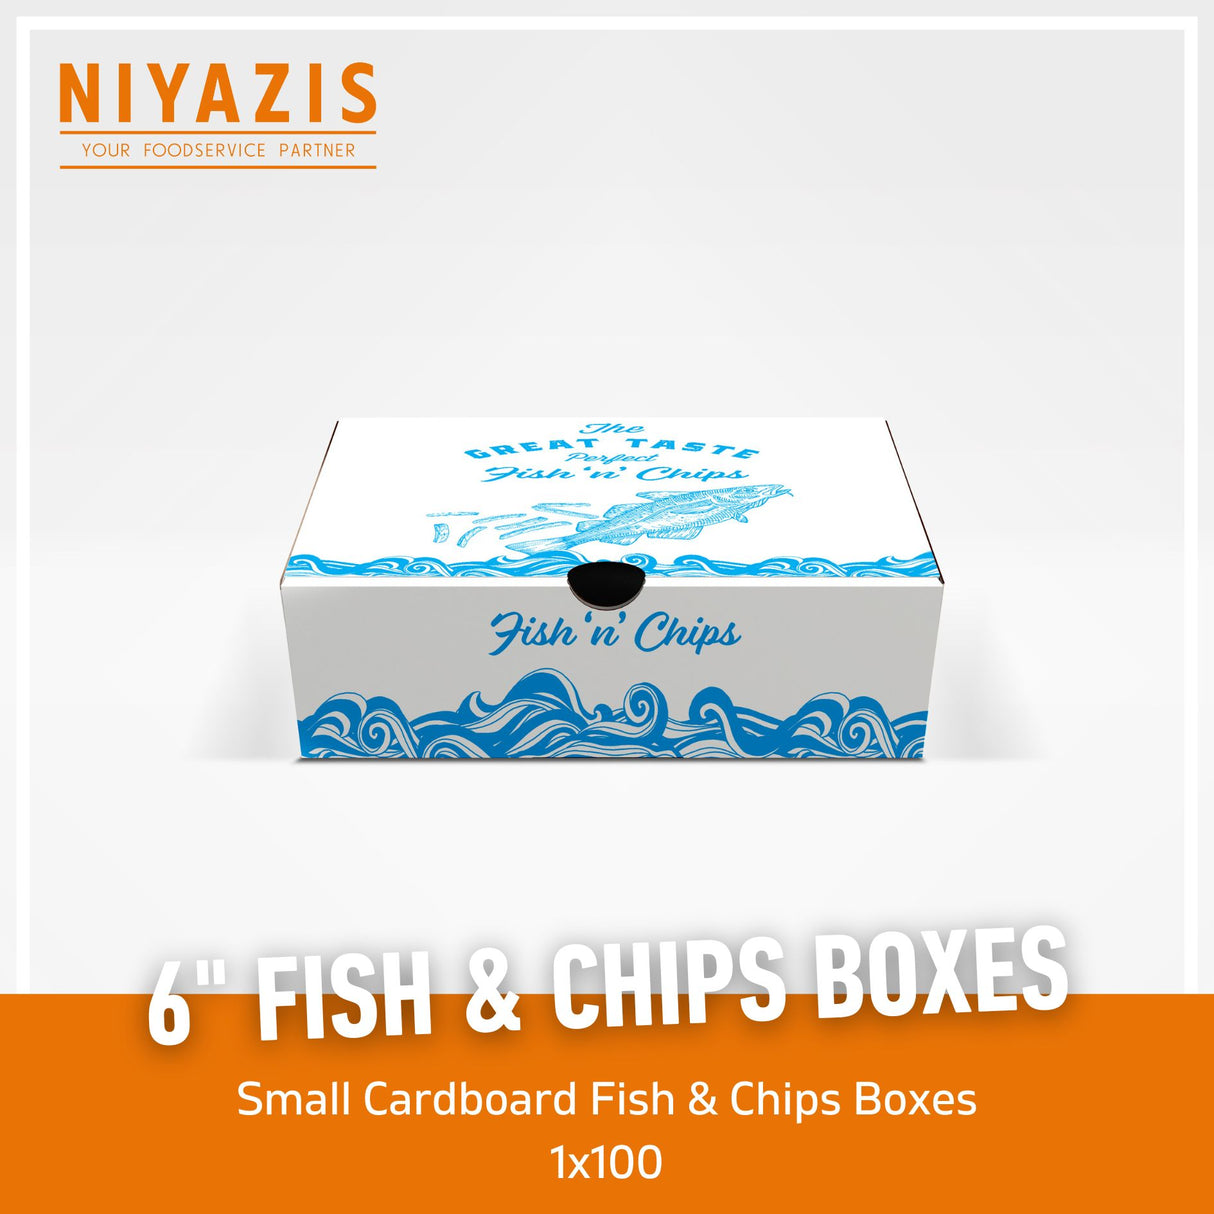 6" Printed Great Taste Fish & Chips Boxes 1X100